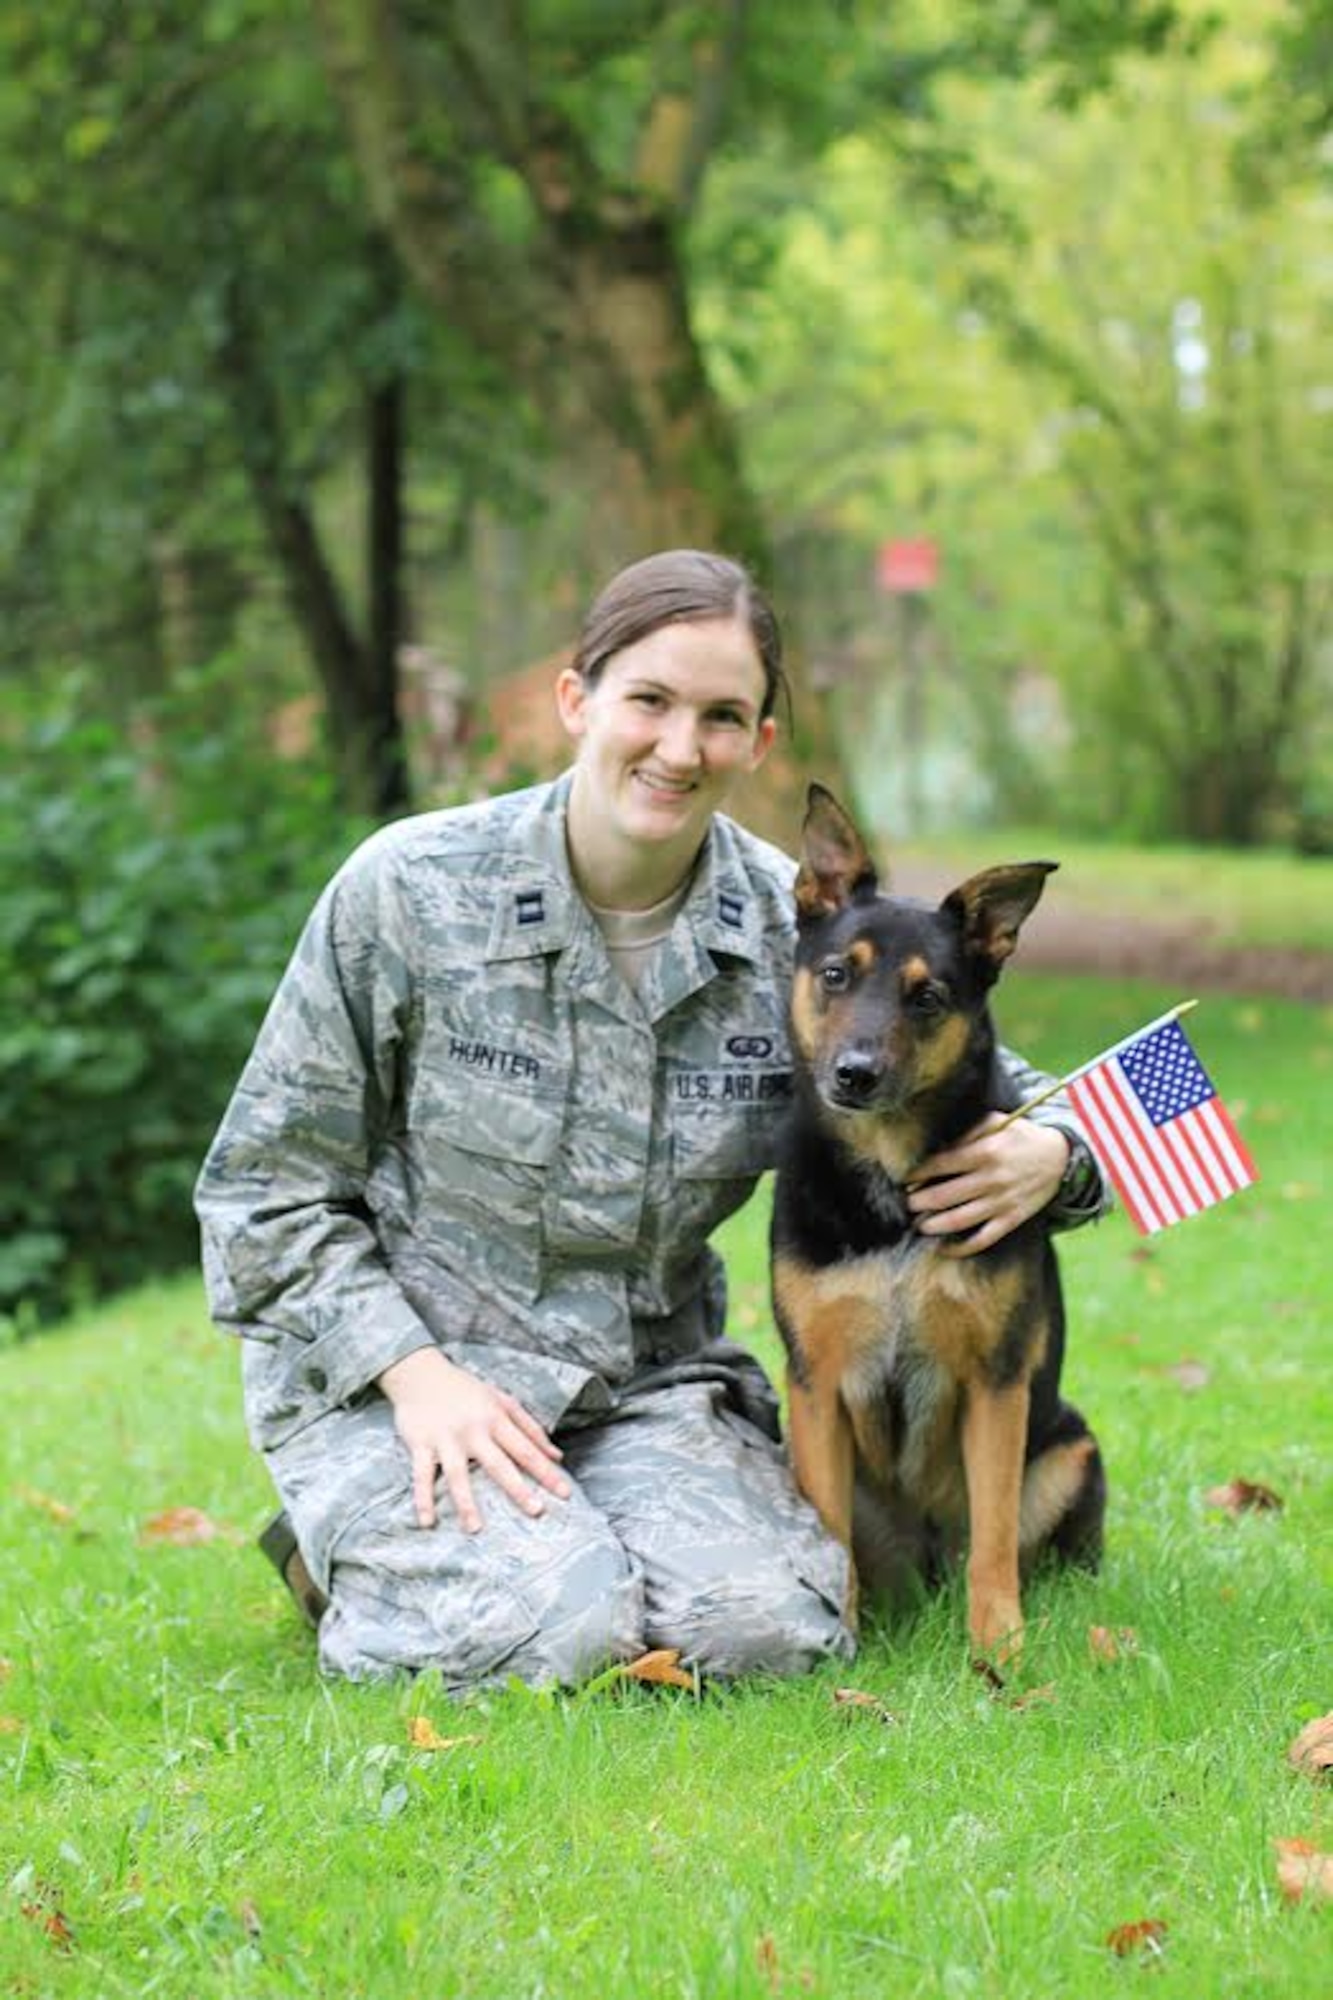 Capt. Annaleis Hunter, 332nd Expeditionary Force Support Flight commander, believes pets are part of the family, but she doesn’t feel there are enough resources to help service members cope with the challenges associated with pet care. 